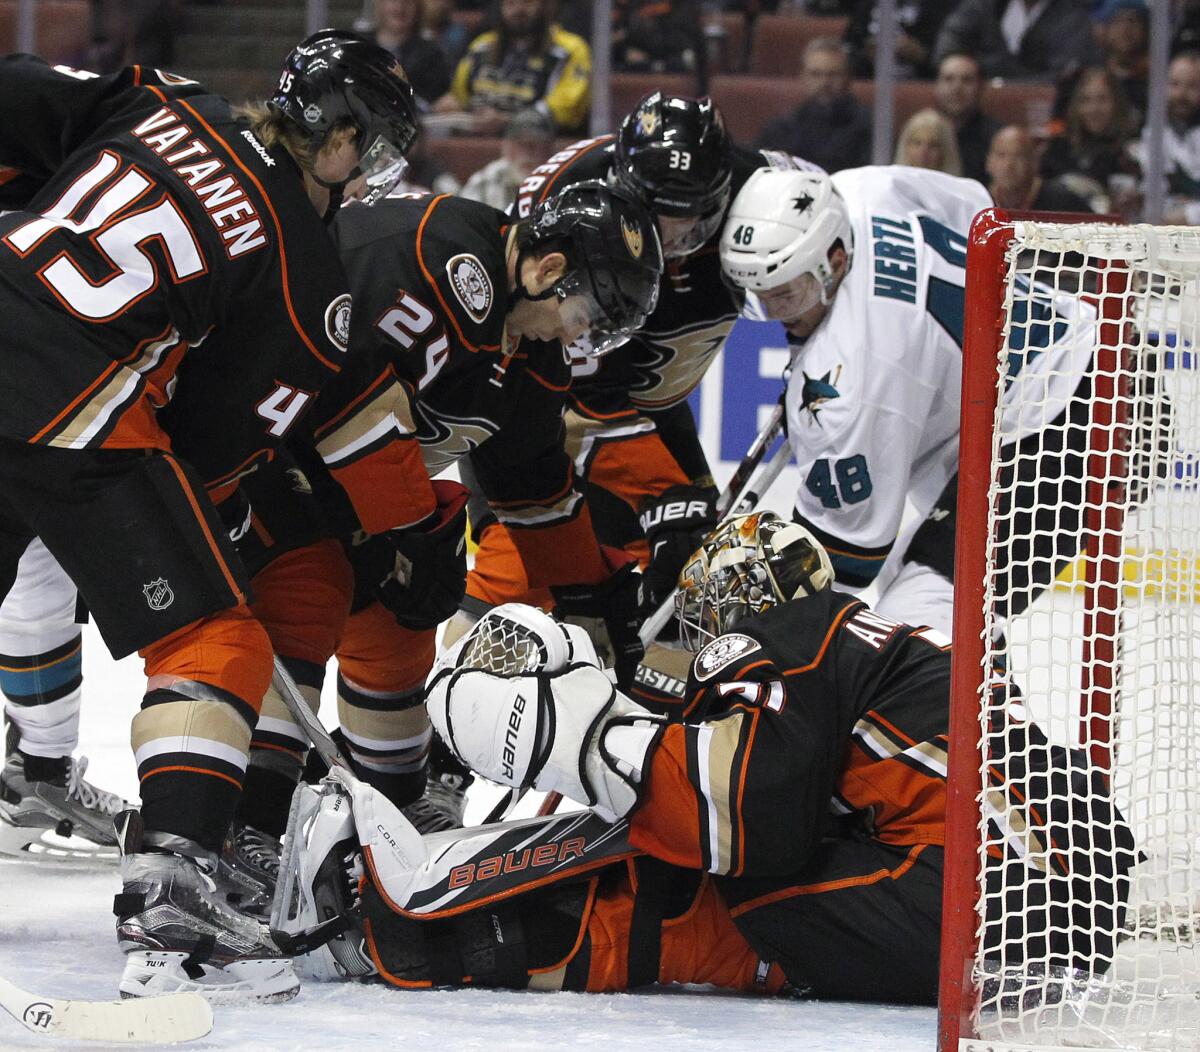 Anaheim goalie Frederik Andersen stops a shot by San Jose center Tomas Hertl while surrounded by a crowd of his teammates during the Ducks' 3-2 win over the Sharks.